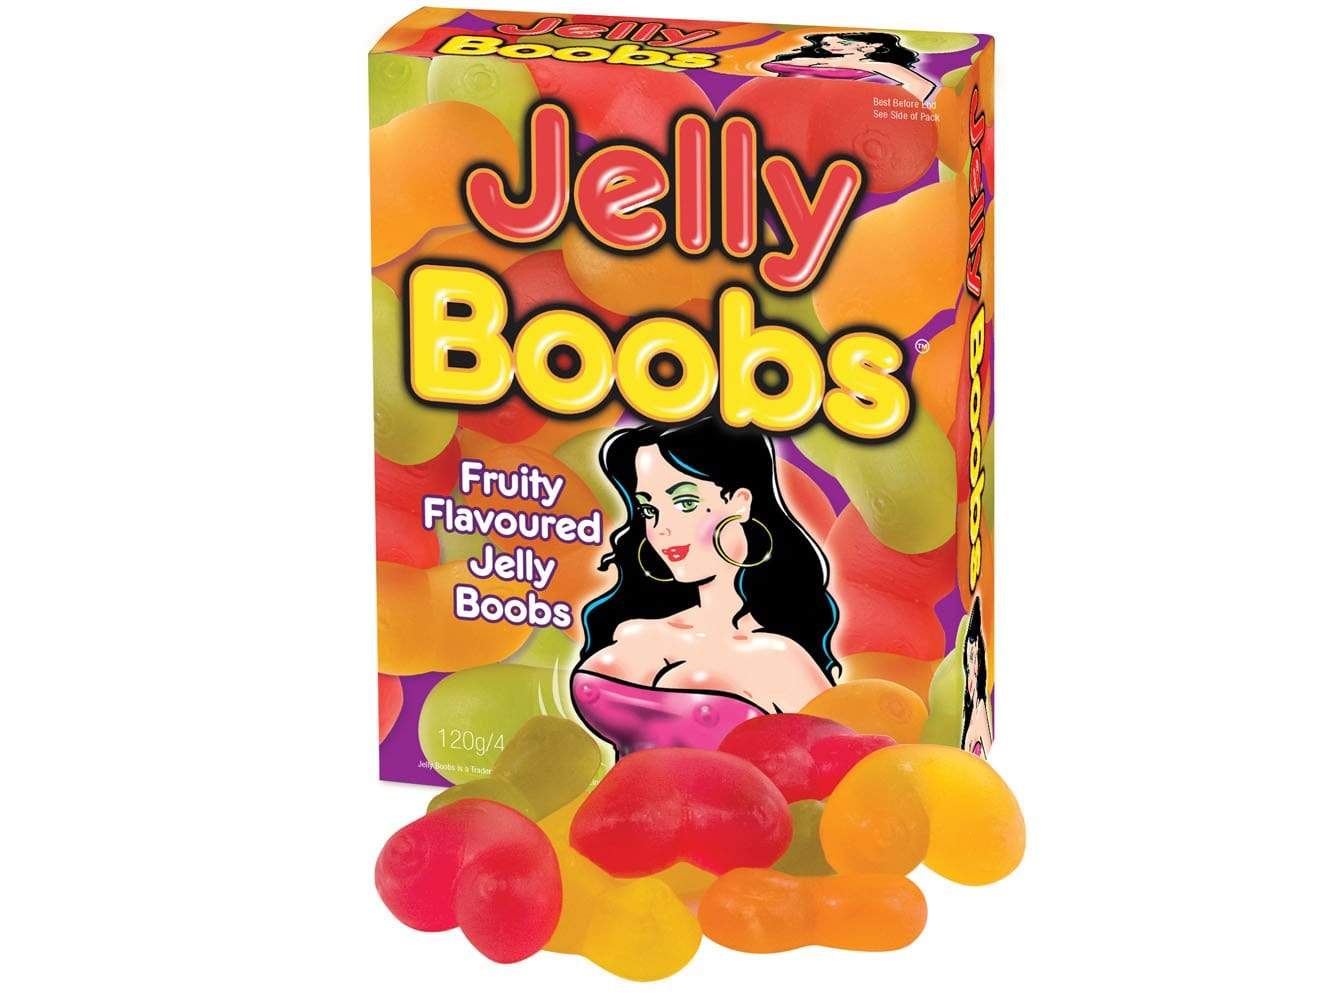 Adult Candy